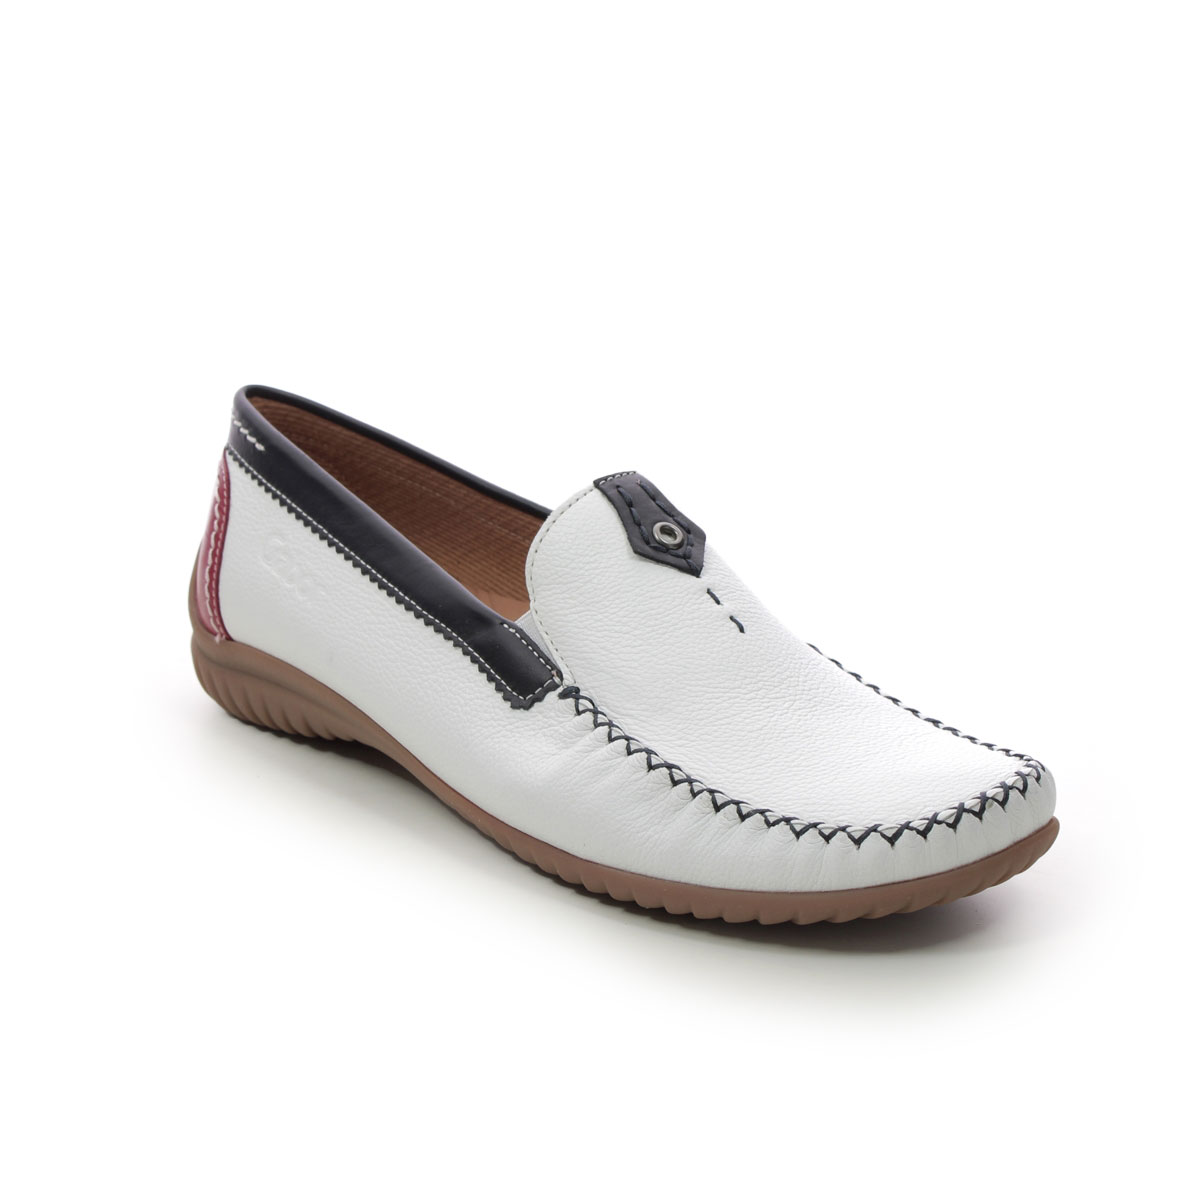 Gabor California White Navy Red Womens loafers 26.090.69 in a Plain Leather in Size 5.5